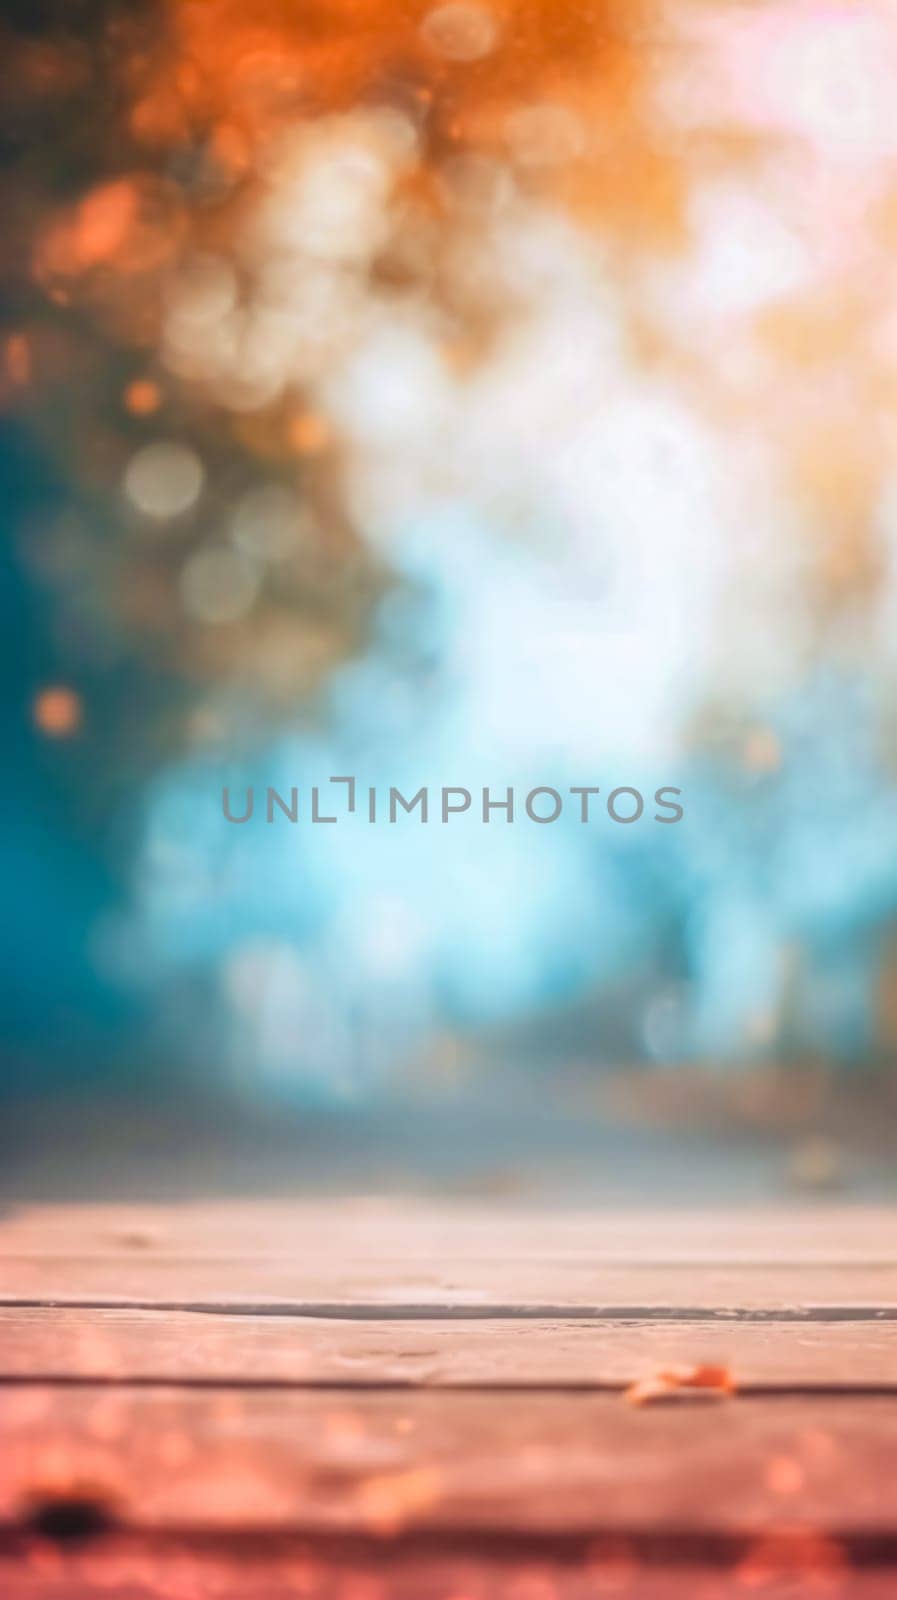 beautifully blurred photograph with a wooden surface in the foreground leading to a bokeh of warm and cool lights, suggesting an autumnal scene or a magical, dreamy atmosphere by Edophoto